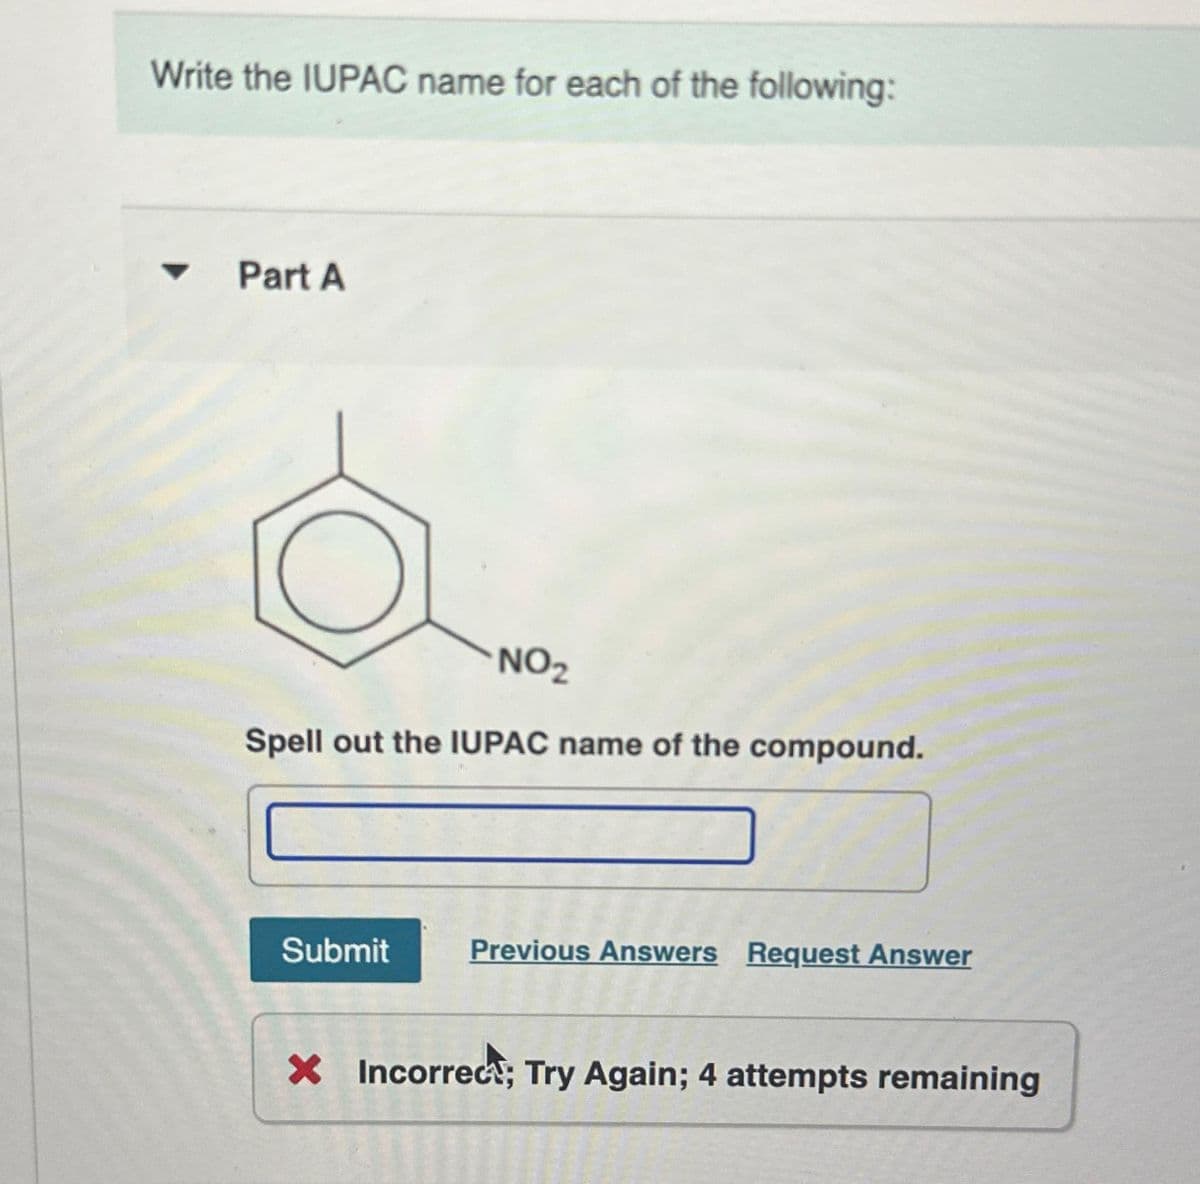 Write the IUPAC name for each of the following:
Part A
NO₂
Spell out the IUPAC name of the compound.
Submit
Previous Answers Request Answer
* Incorrect; Try Again; 4 attempts remaining